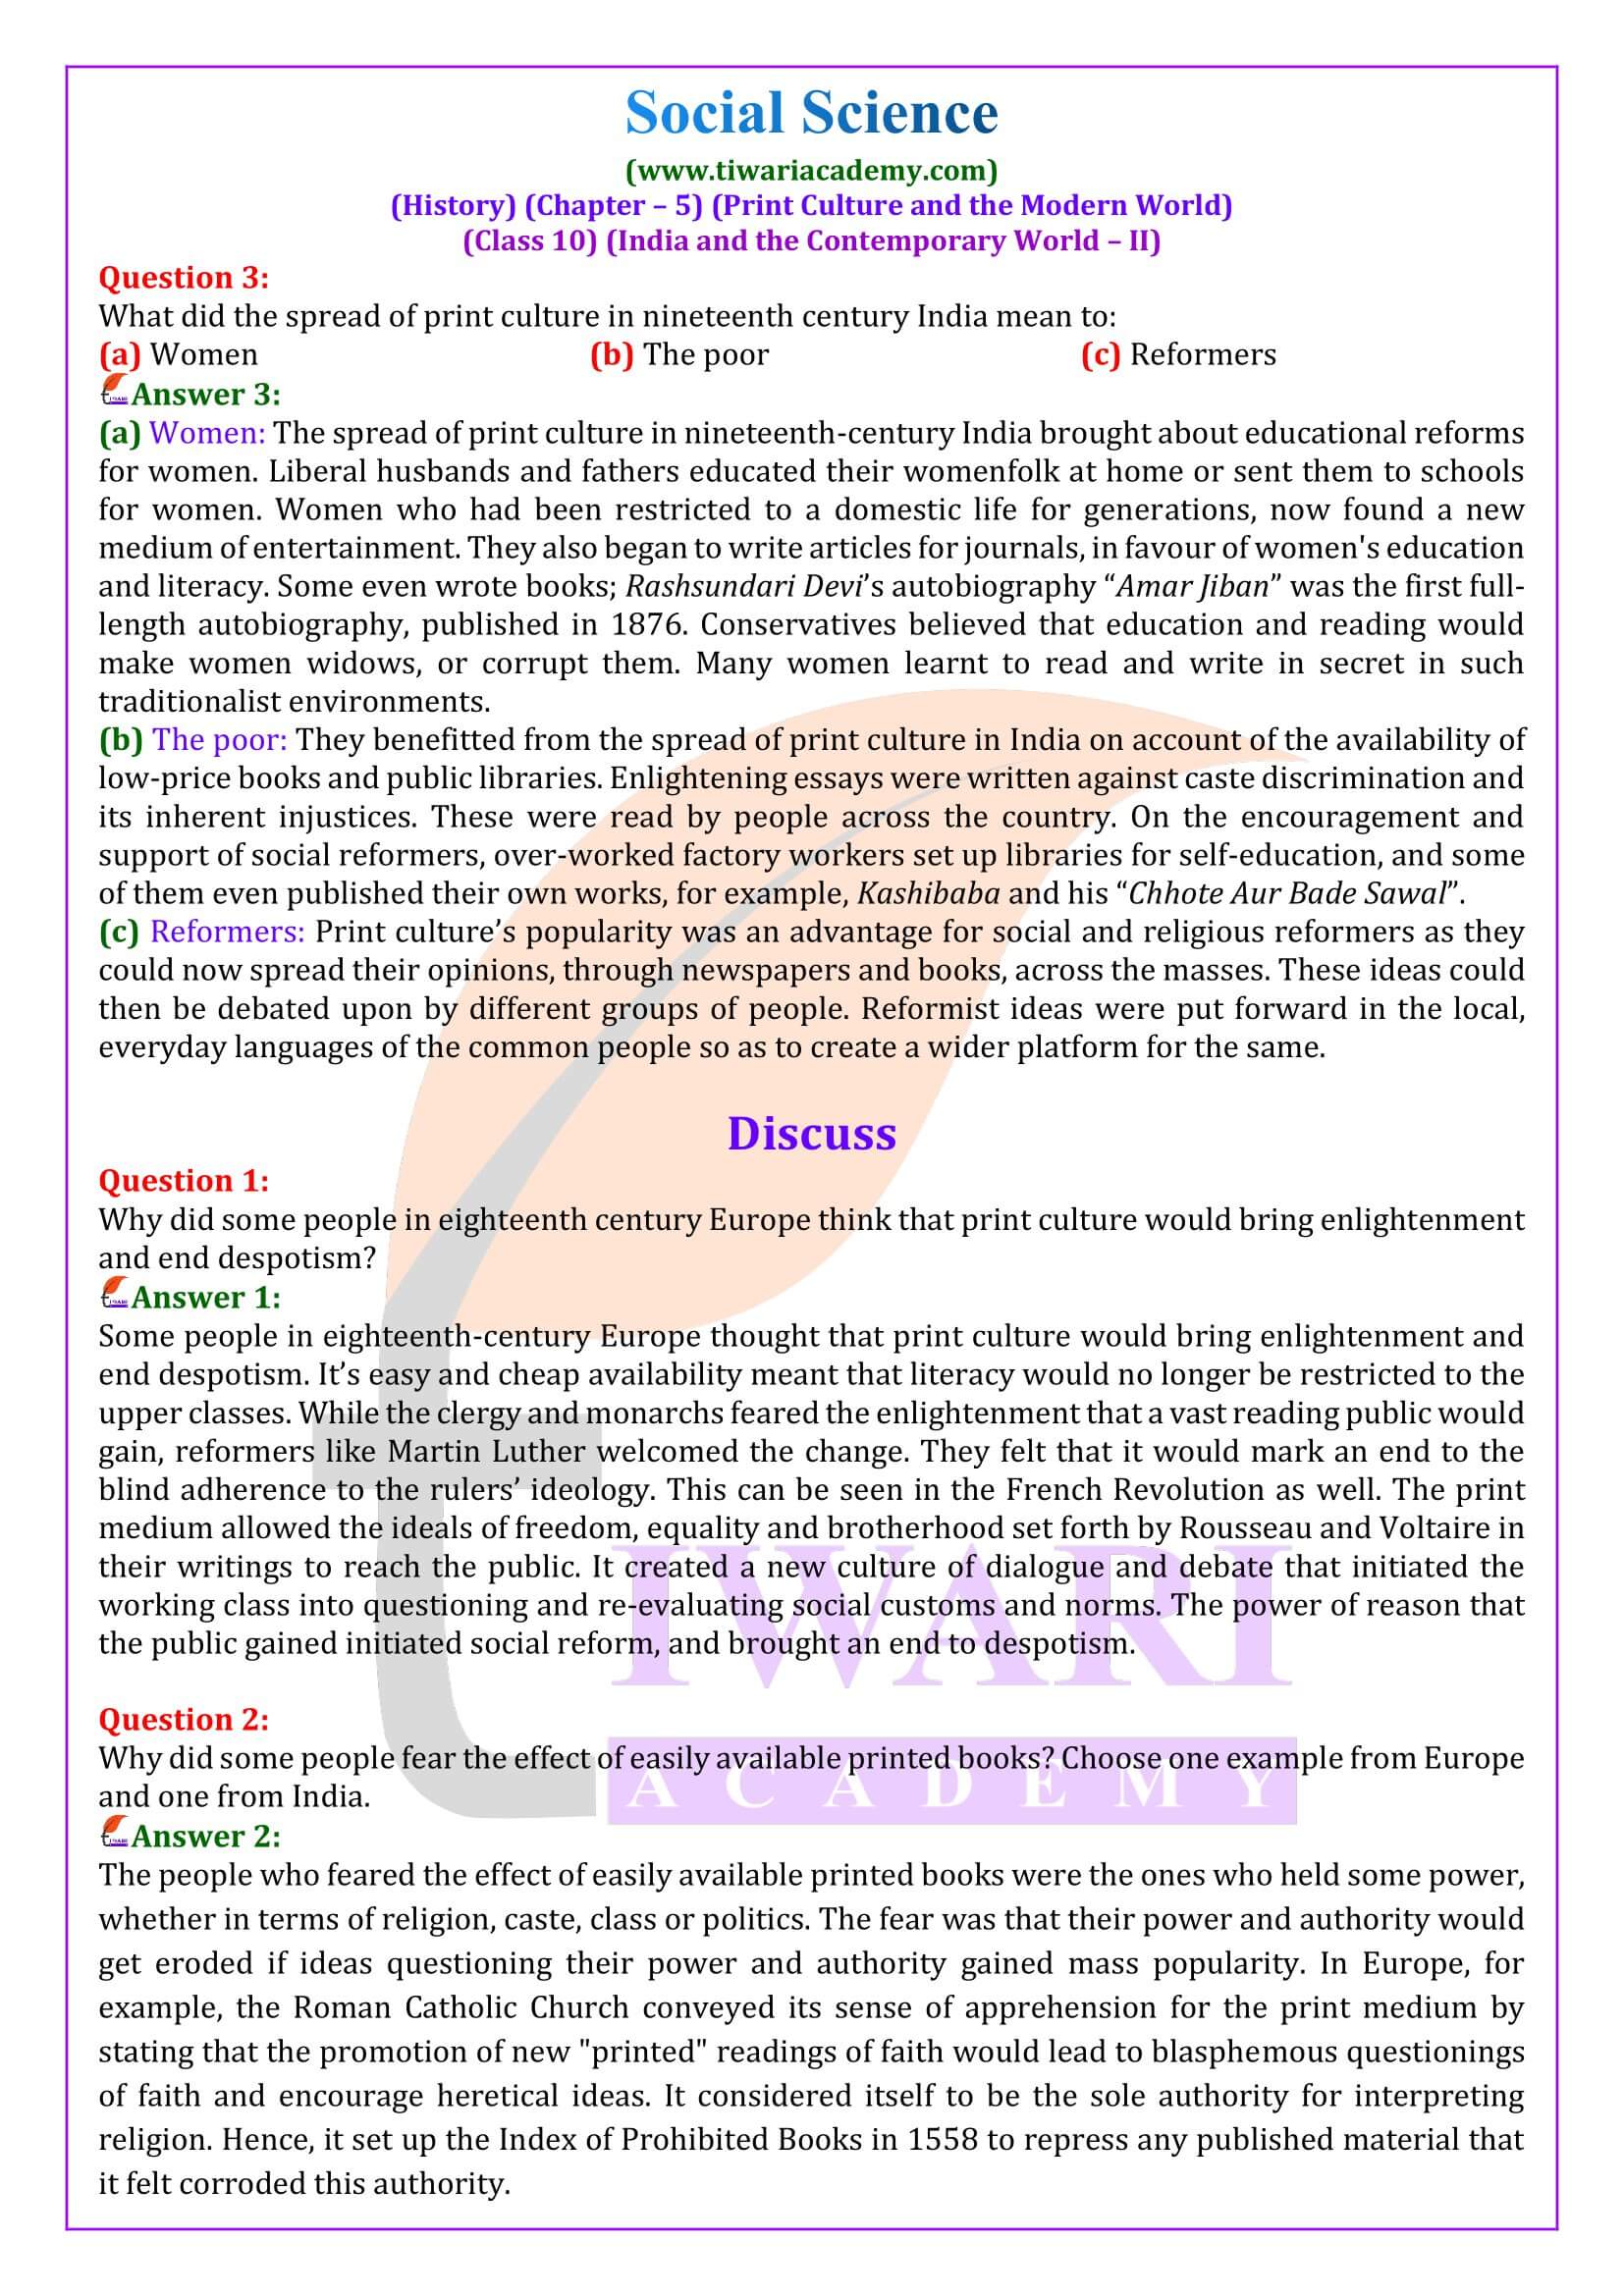 NCERT Solutions for Class 10 History Chapter 5